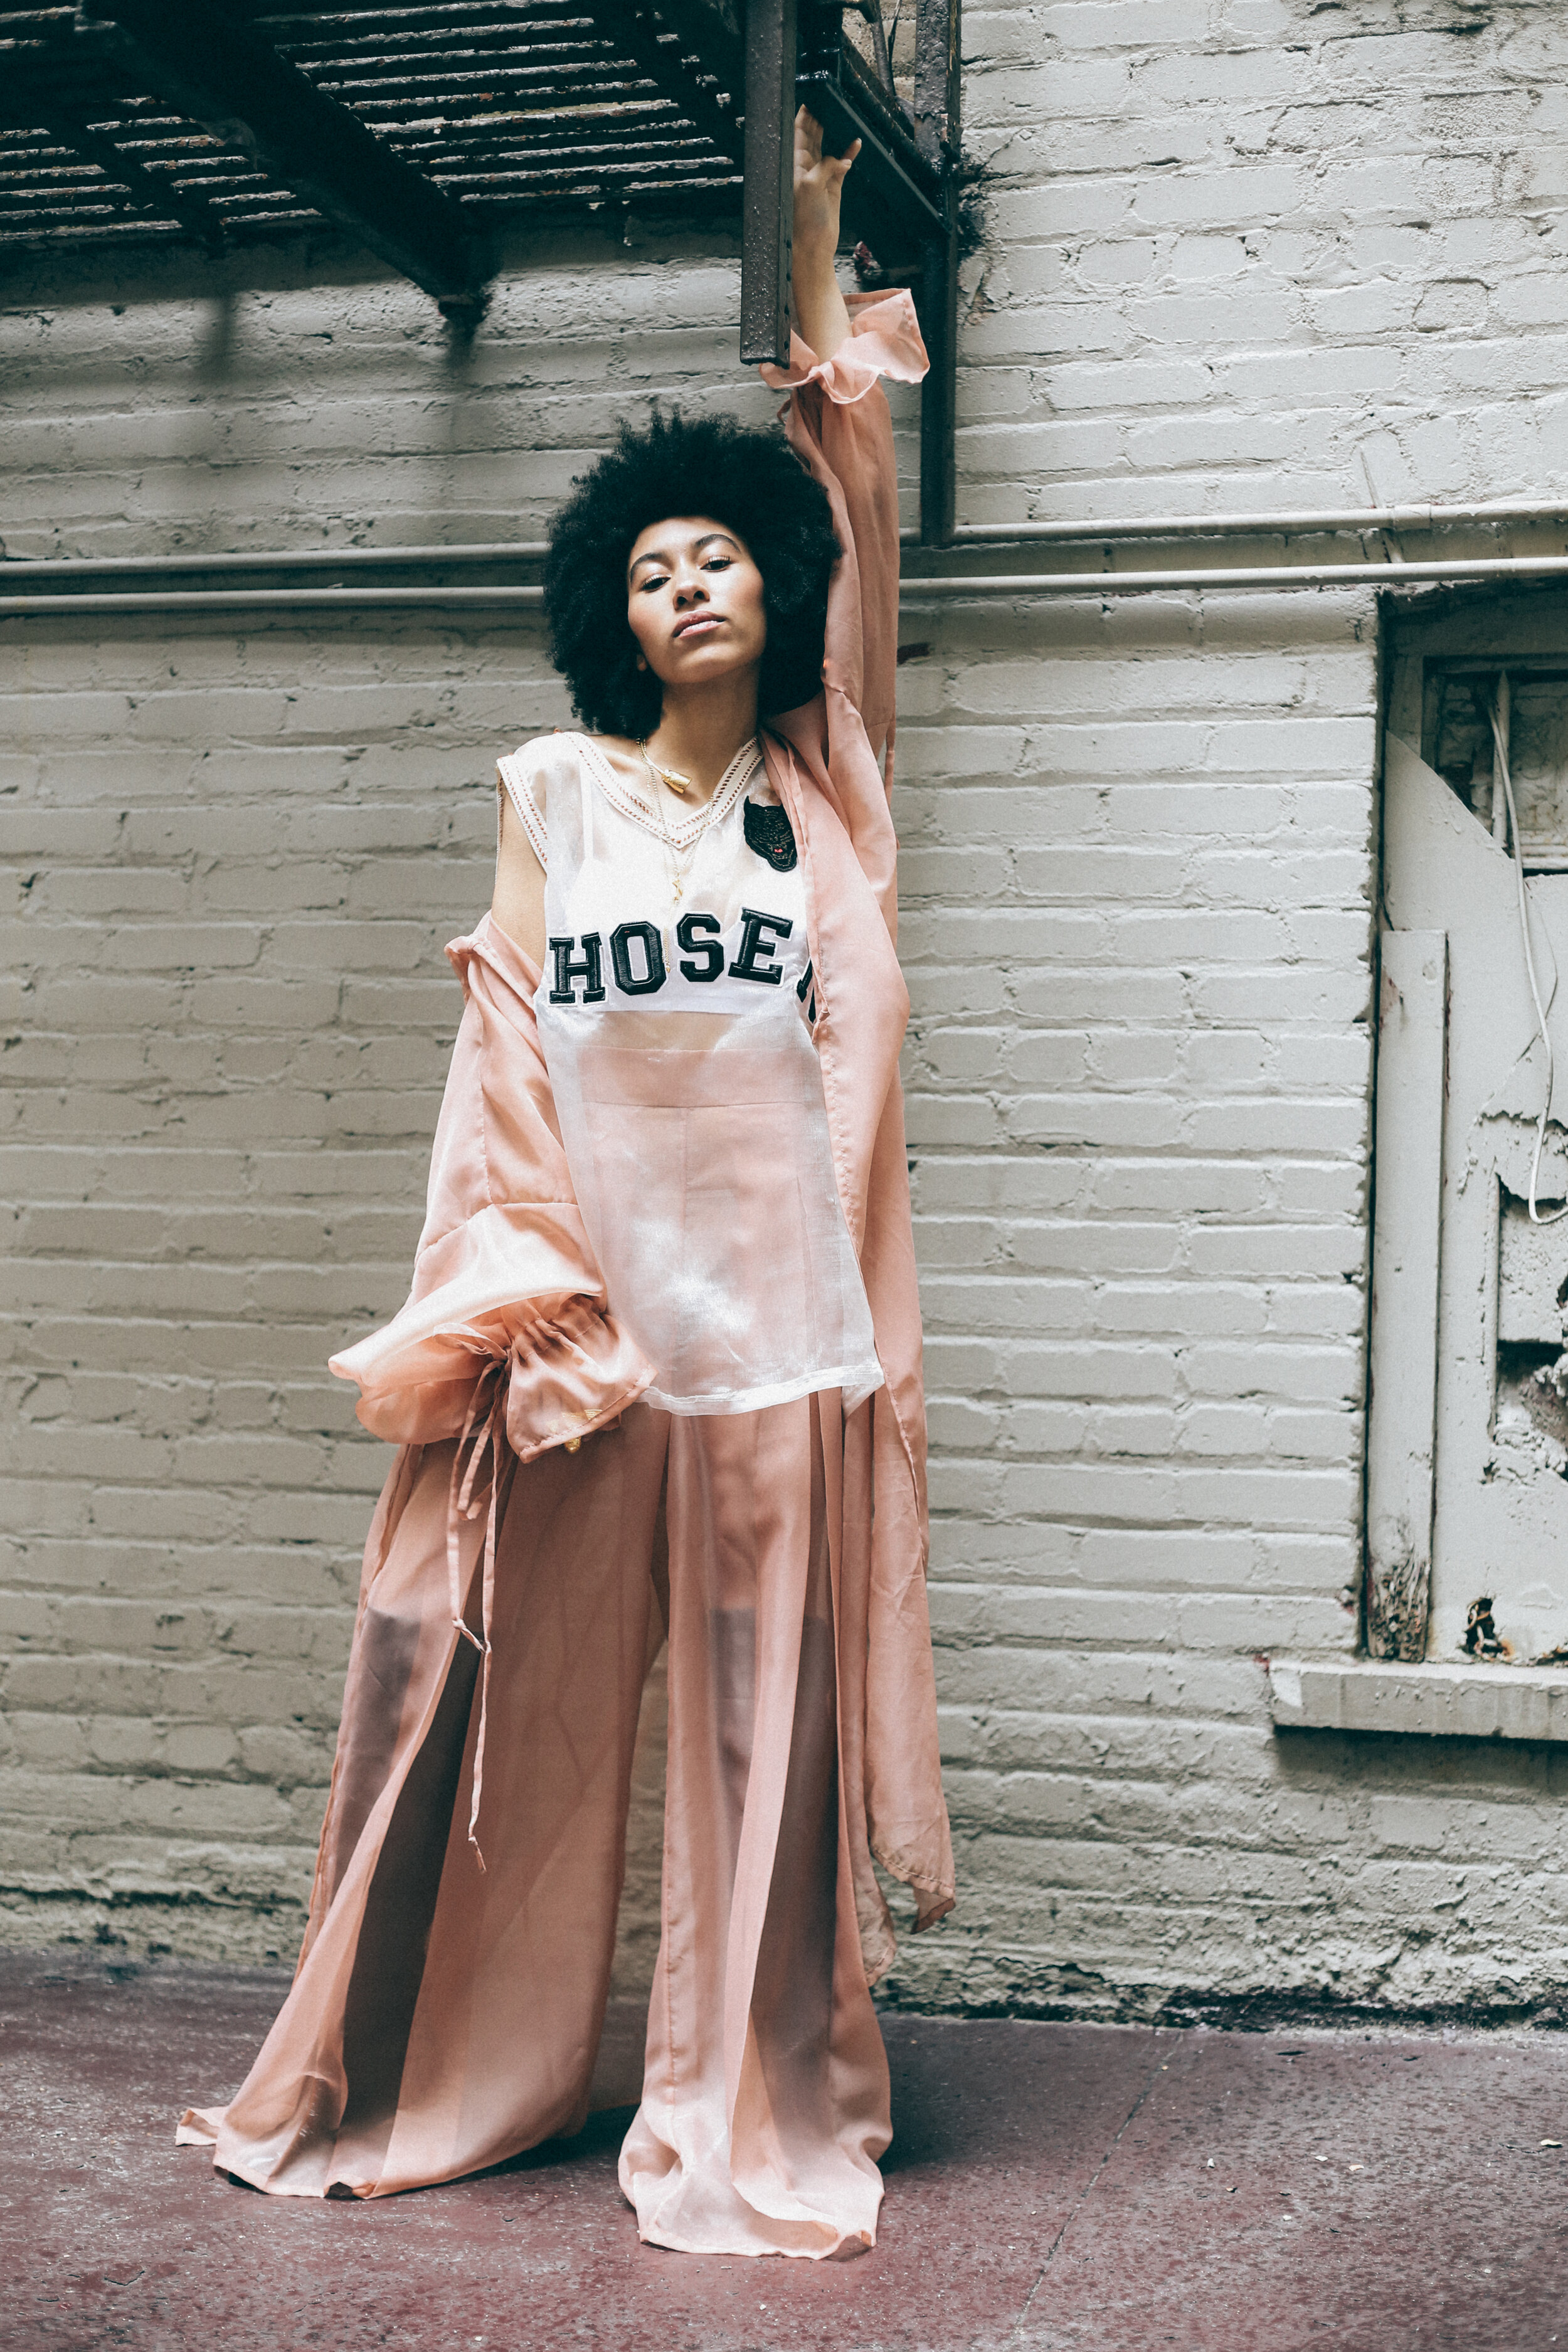  Aliyah Monet photographed by Dee Williams, Styled by Ore Zaccheus, Produced by Tahira Jarrett for #SHESFWRD Issue 1  